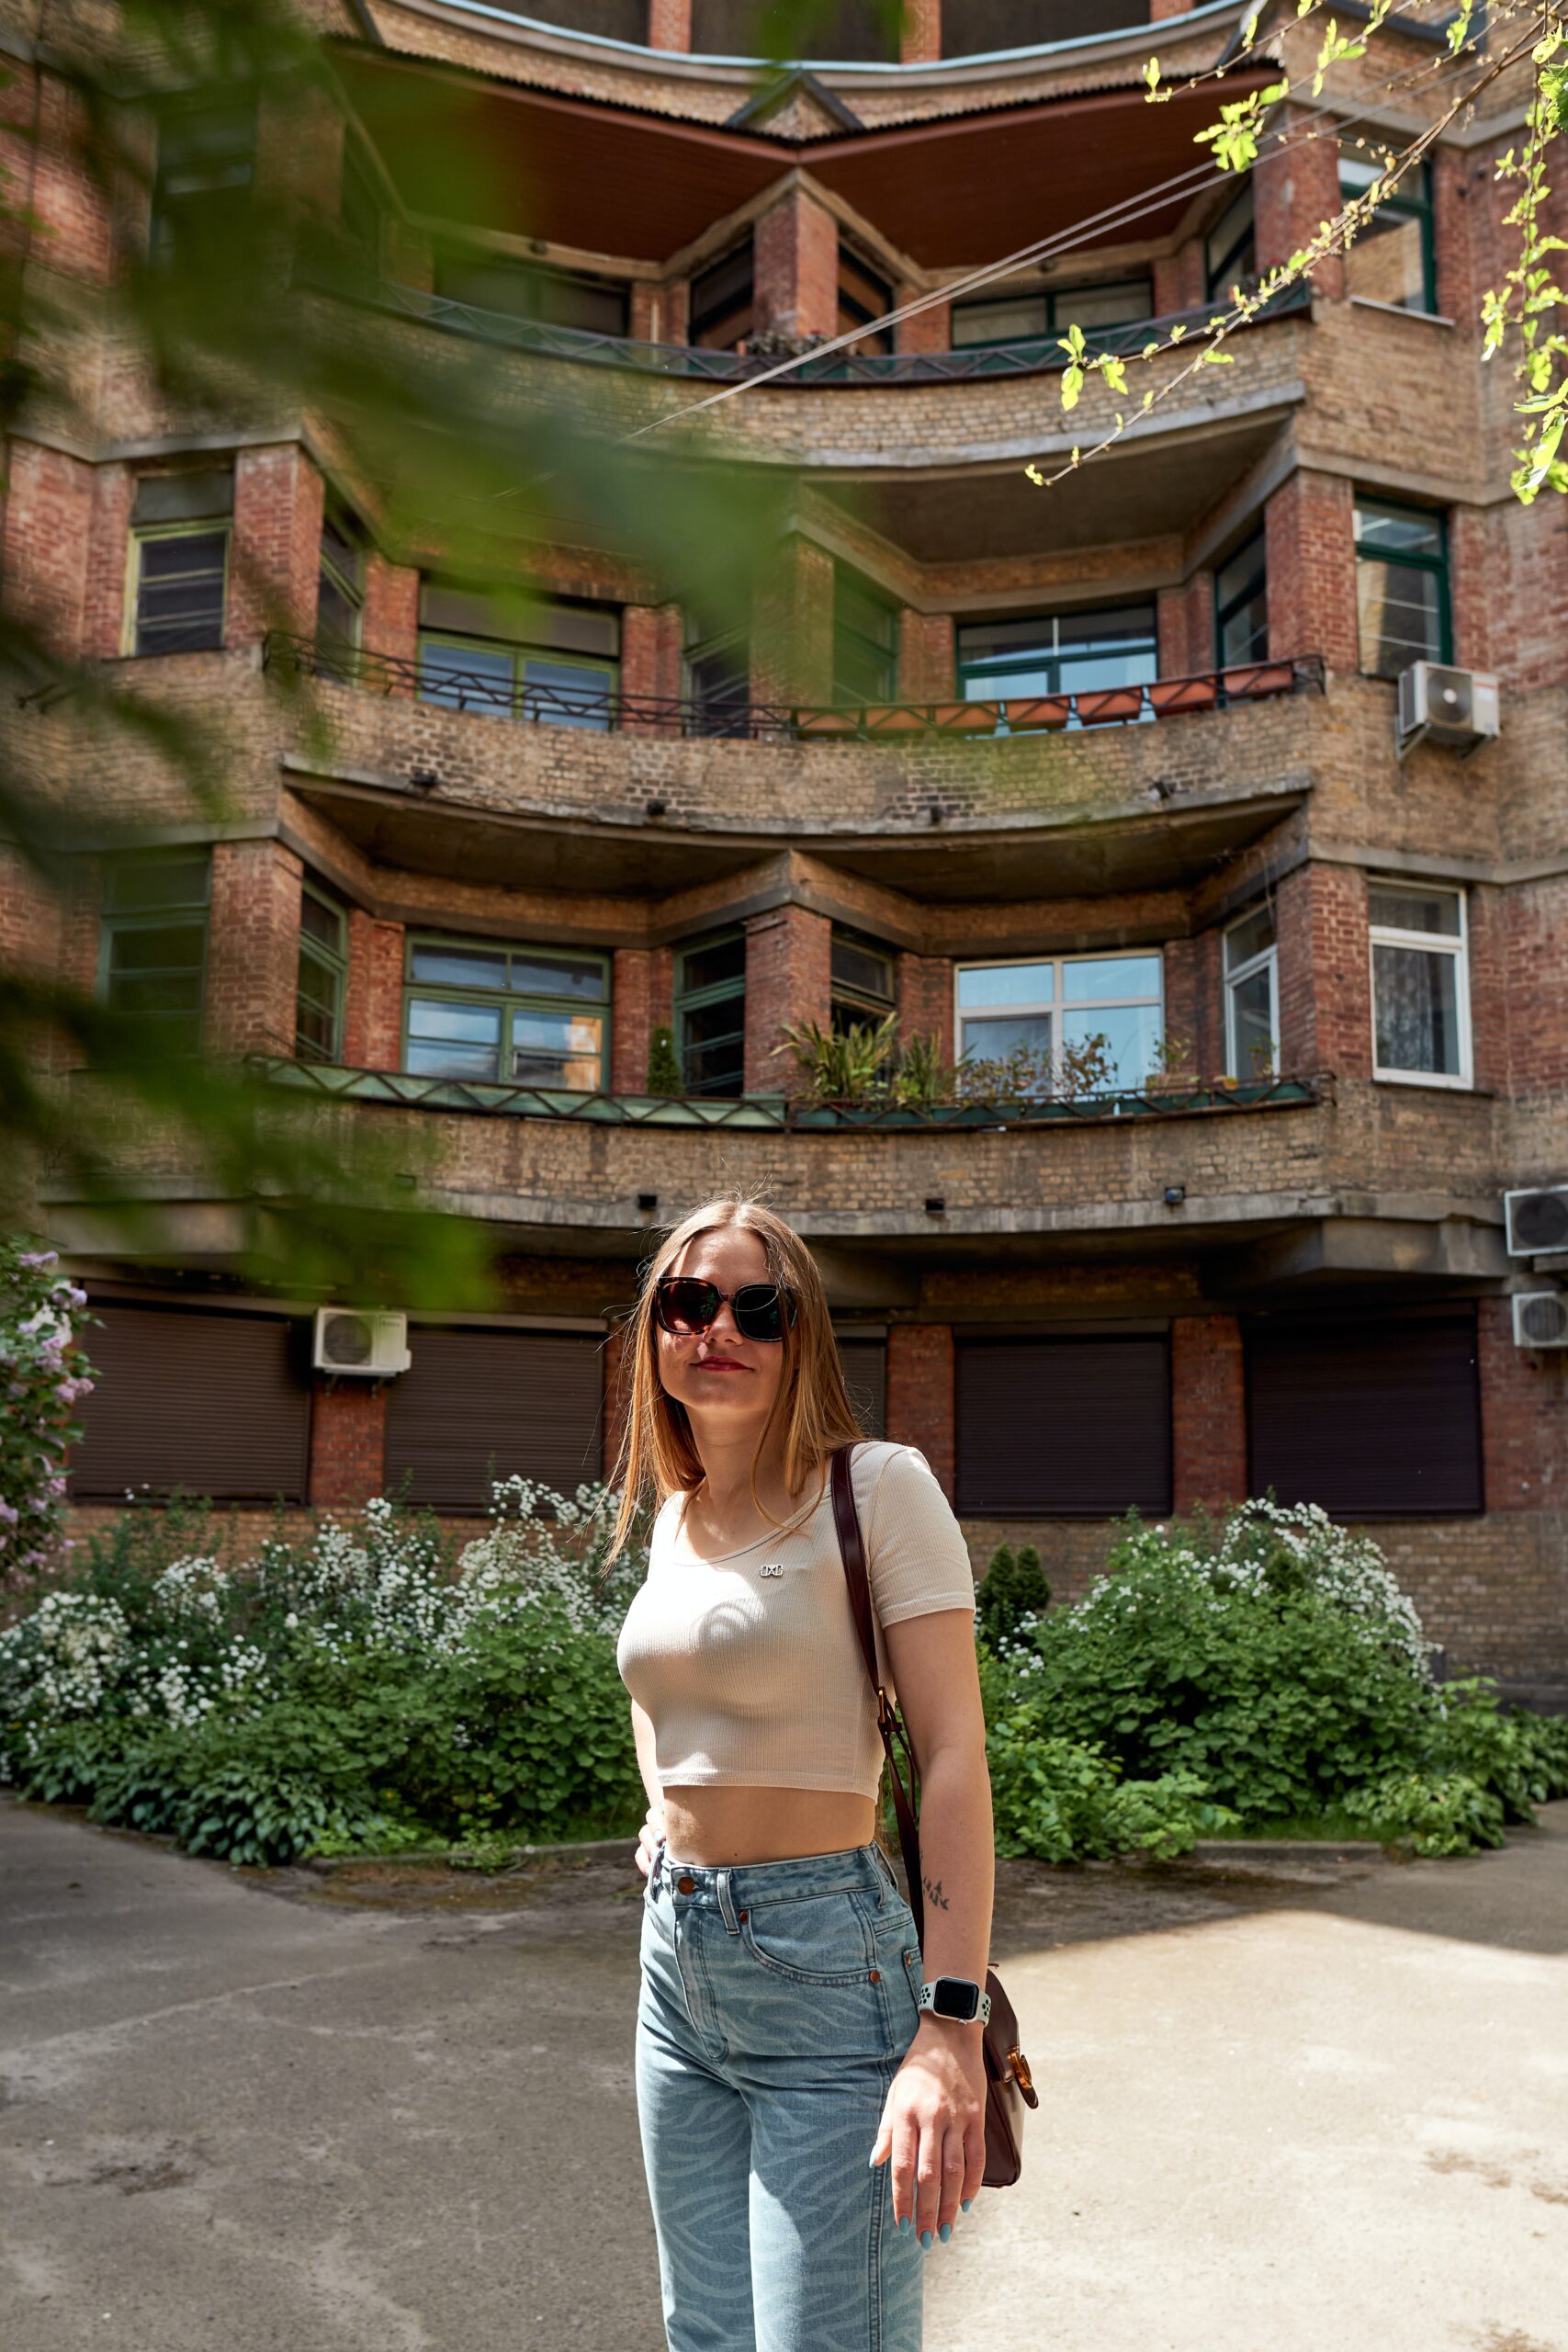 a woman standing on a skateboard in front of a building